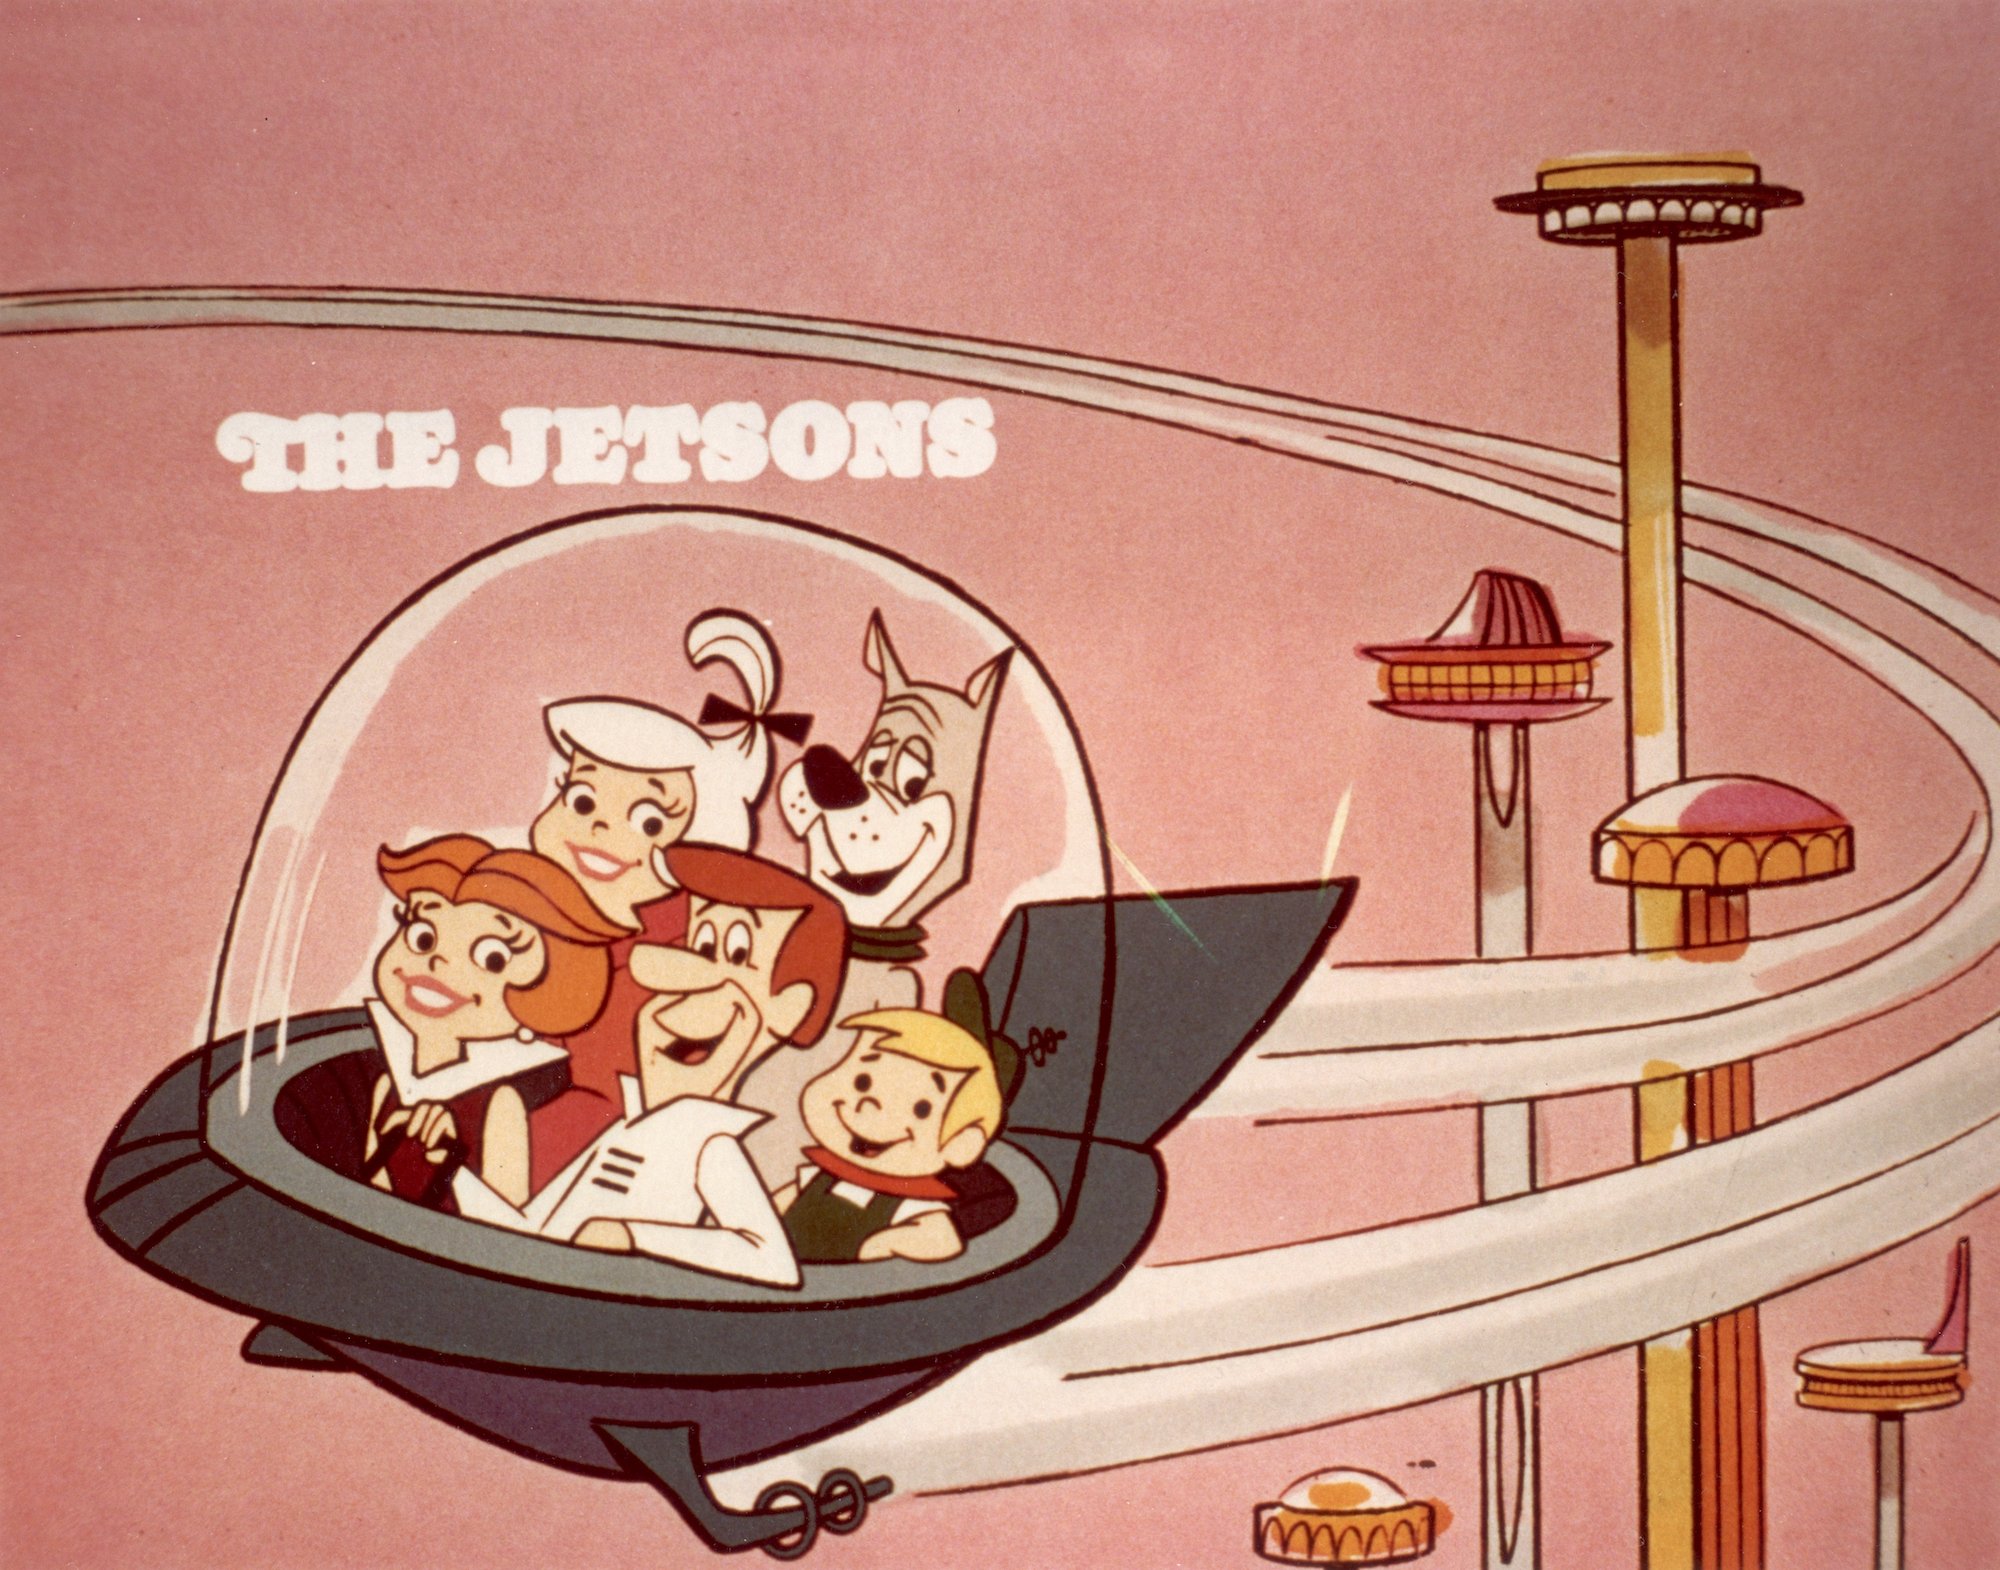 The Jetsons poster will the cast in a flying car